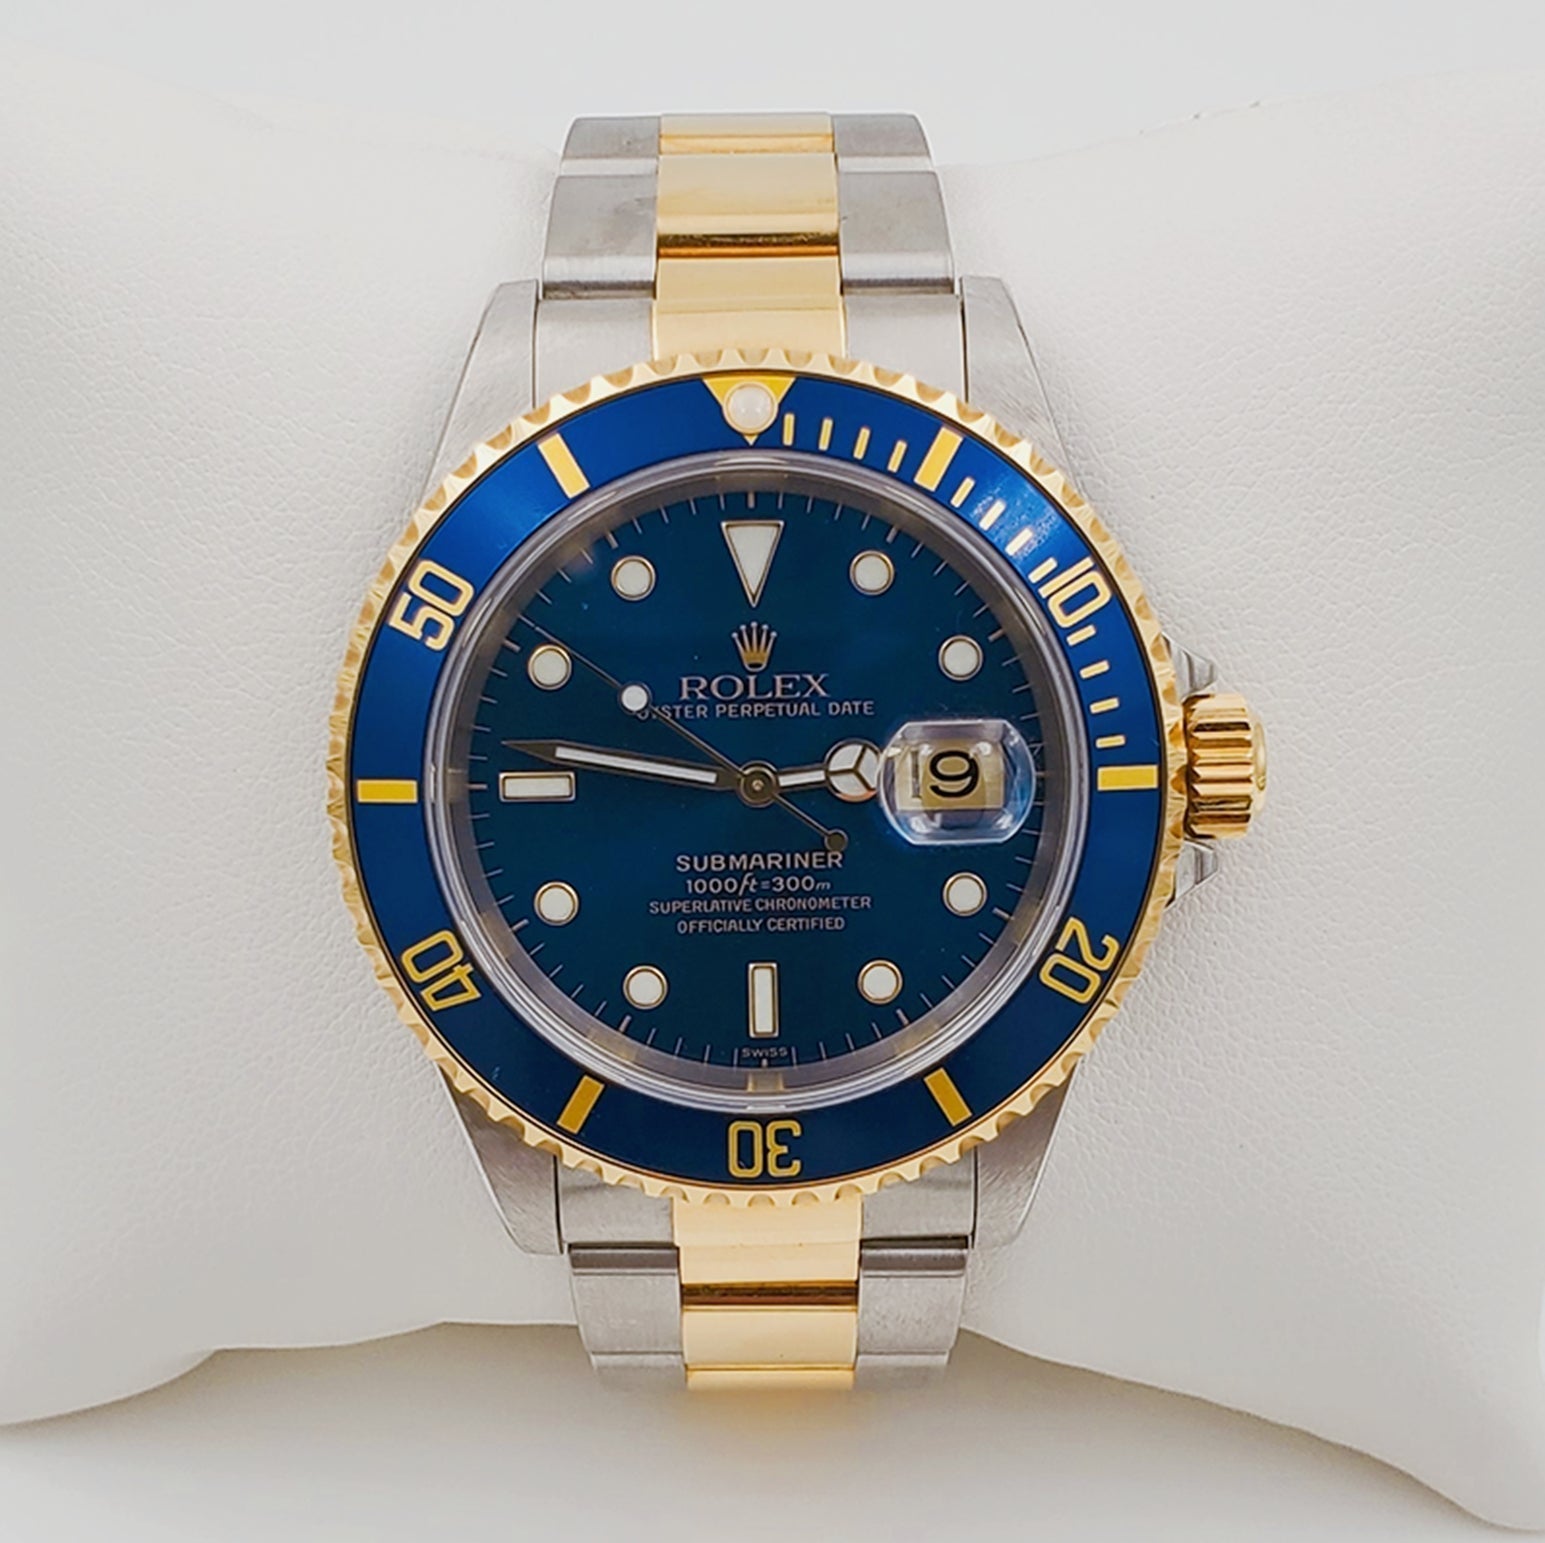 2003 Men's Rolex Submariner 40mm Two Tone Oyster Perpetual 18K Yellow Gold / Stainless Steel Wristwatch w/ Blue Dial & Blue Bezel. (Pre-Owned 16613)